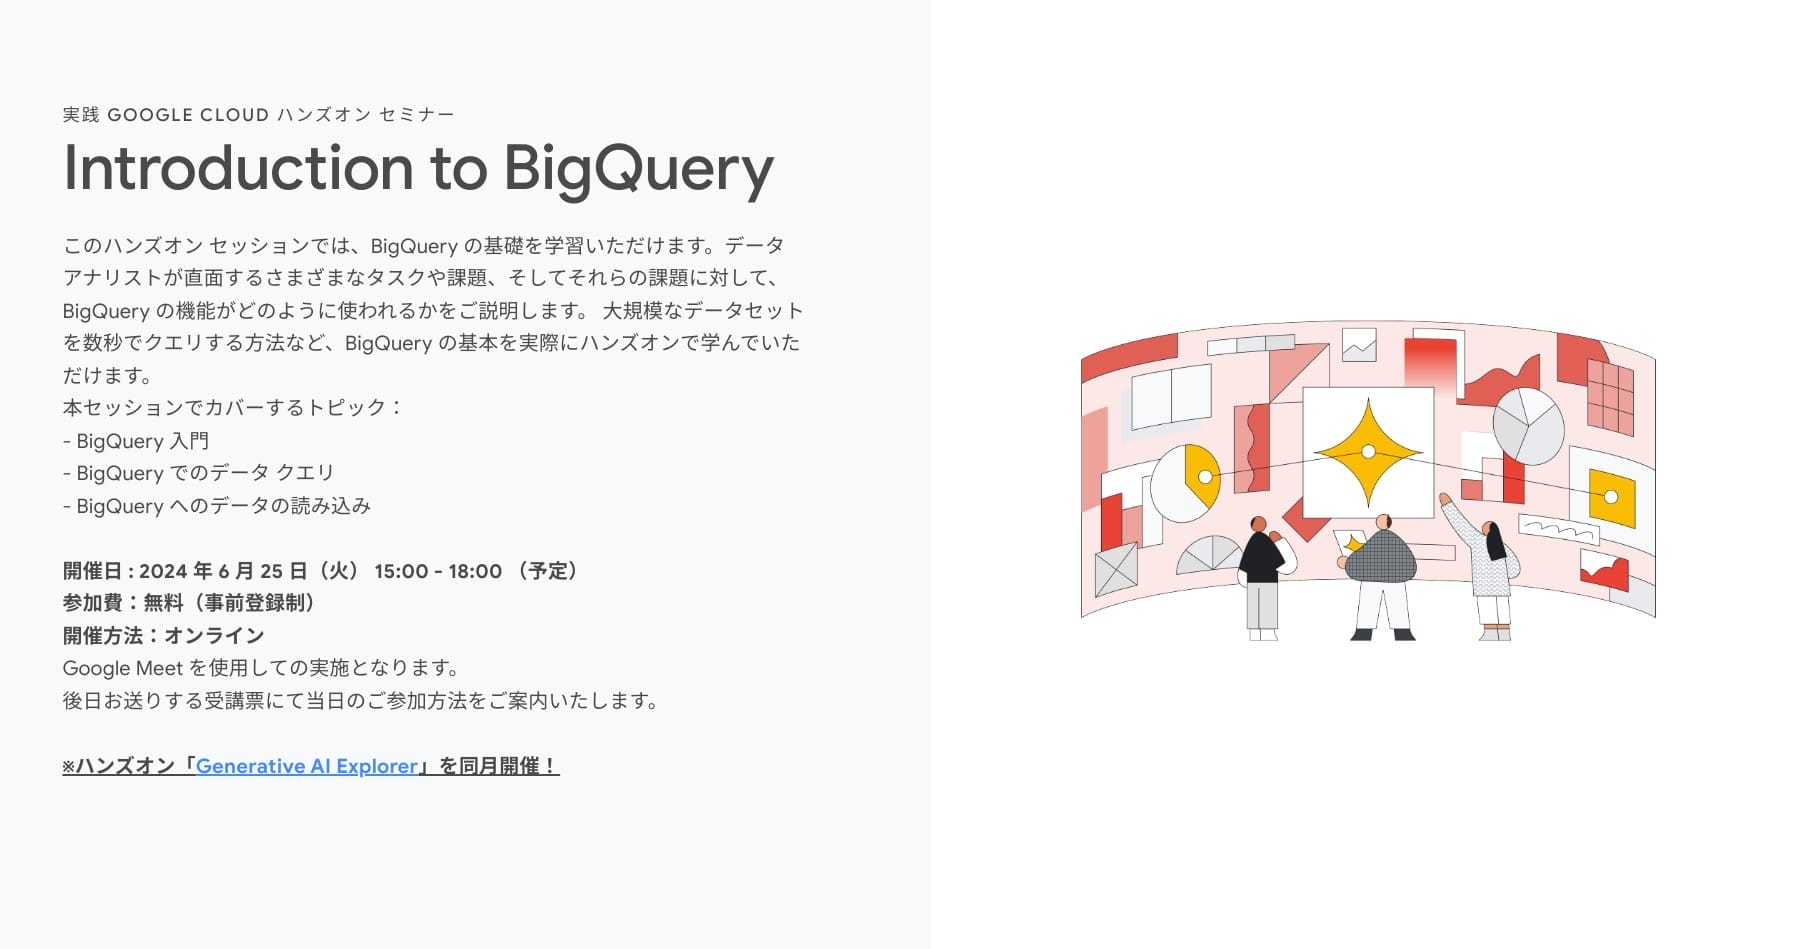 [Google Cloud] Introduction to BigQuery